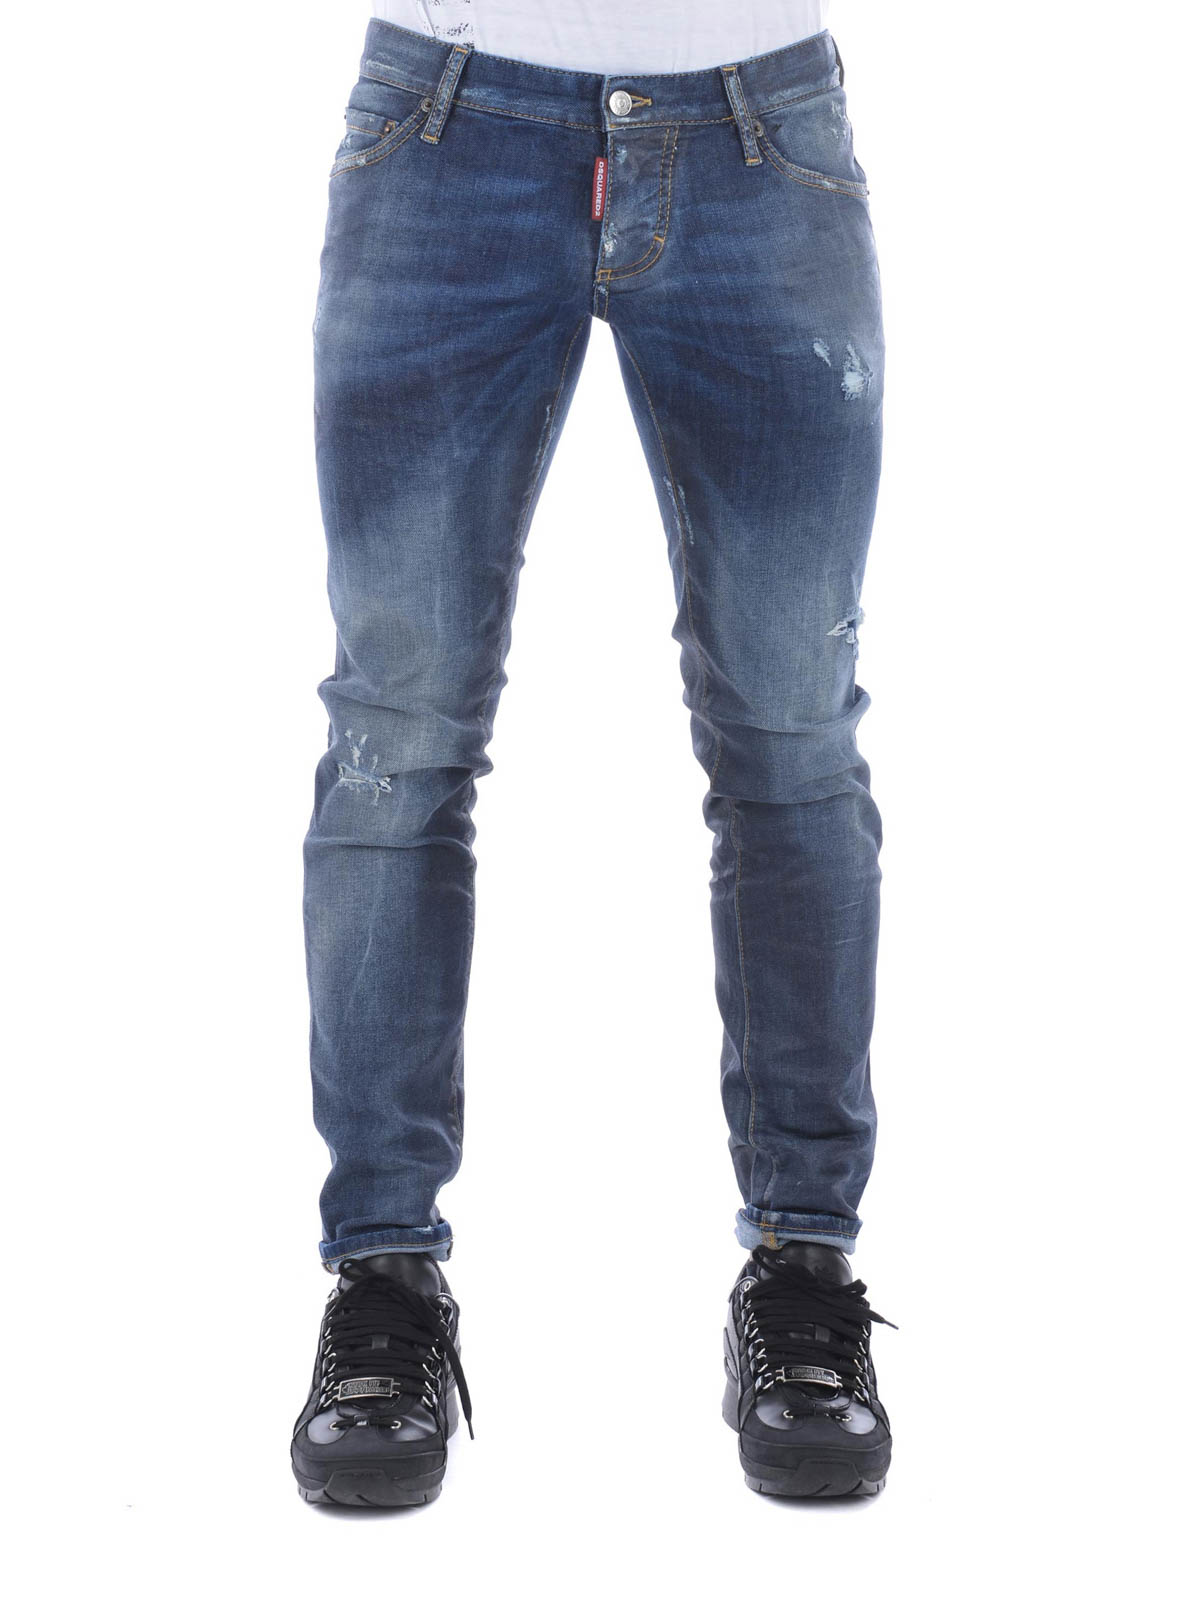 Skinny jeans Dsquared2 - Crotch Packo low rise denim jeans ...